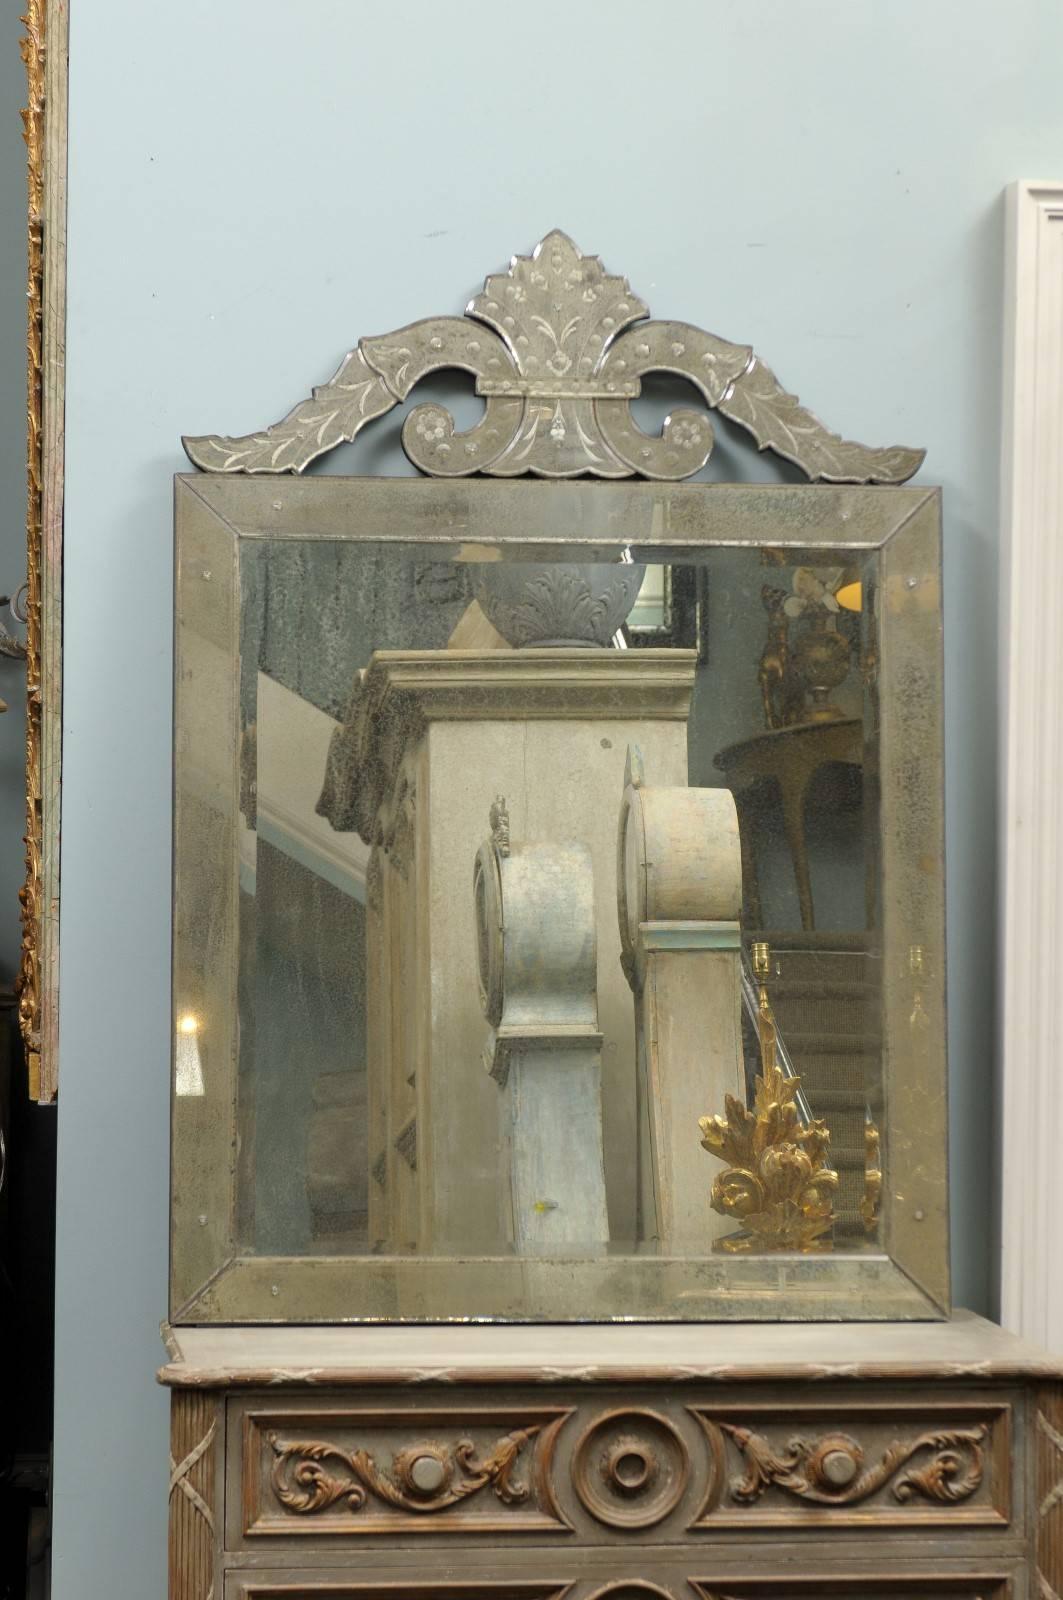 The Roma Venetian style mirror. This handmade, hand-silver Venetian style mirror features a rectangular frame topped with a nicely shaped crest with two volutes on each side ending with stylized floral motif. The central glass shows a medium